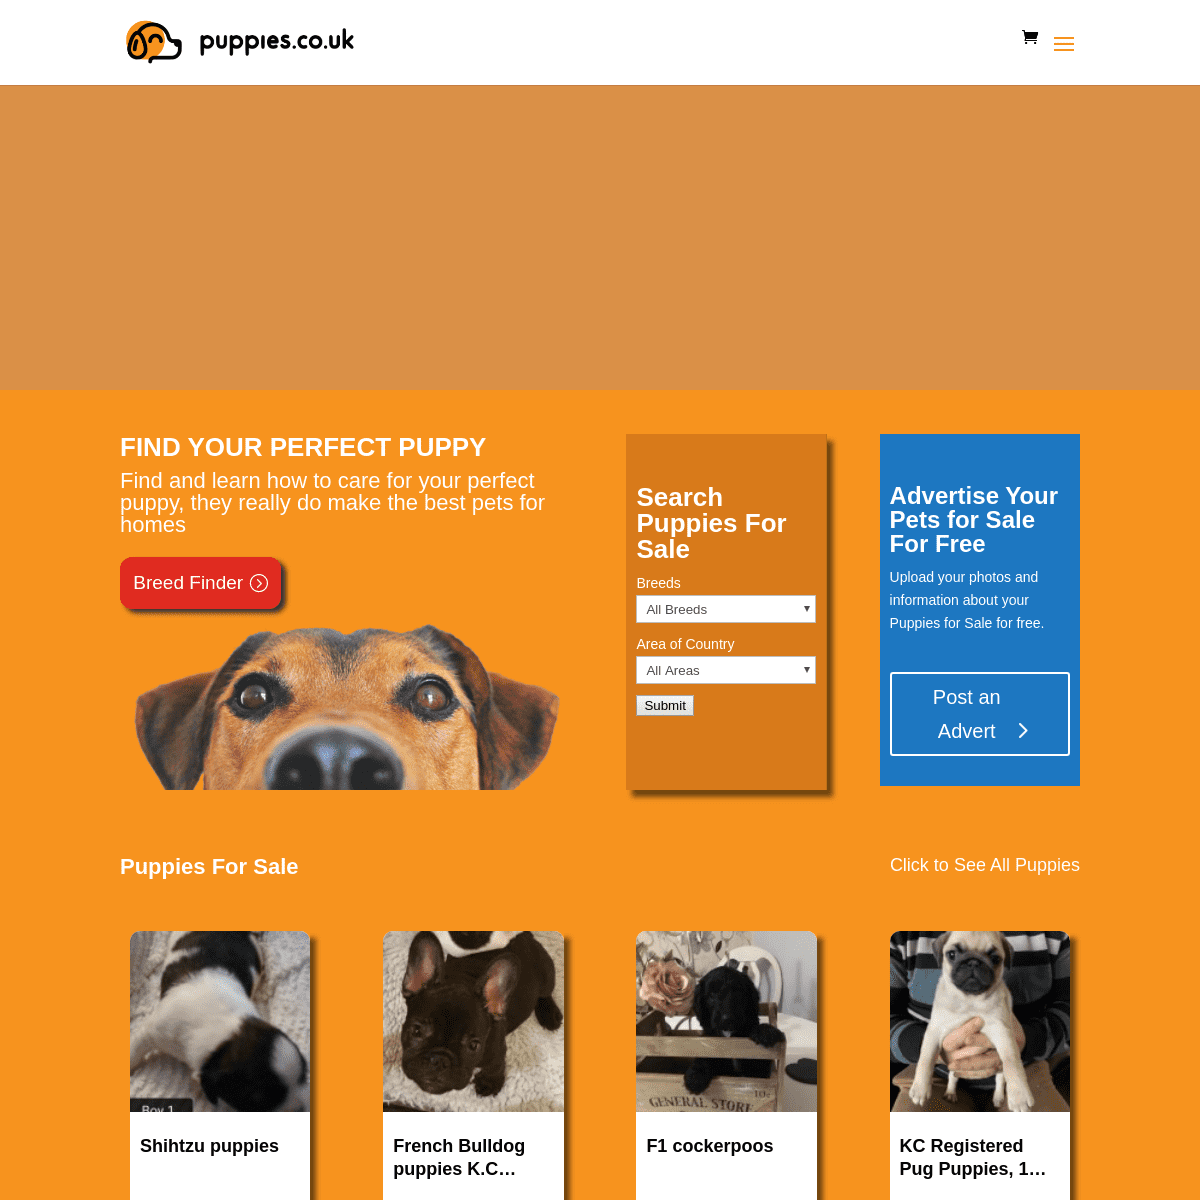 A complete backup of puppies.co.uk